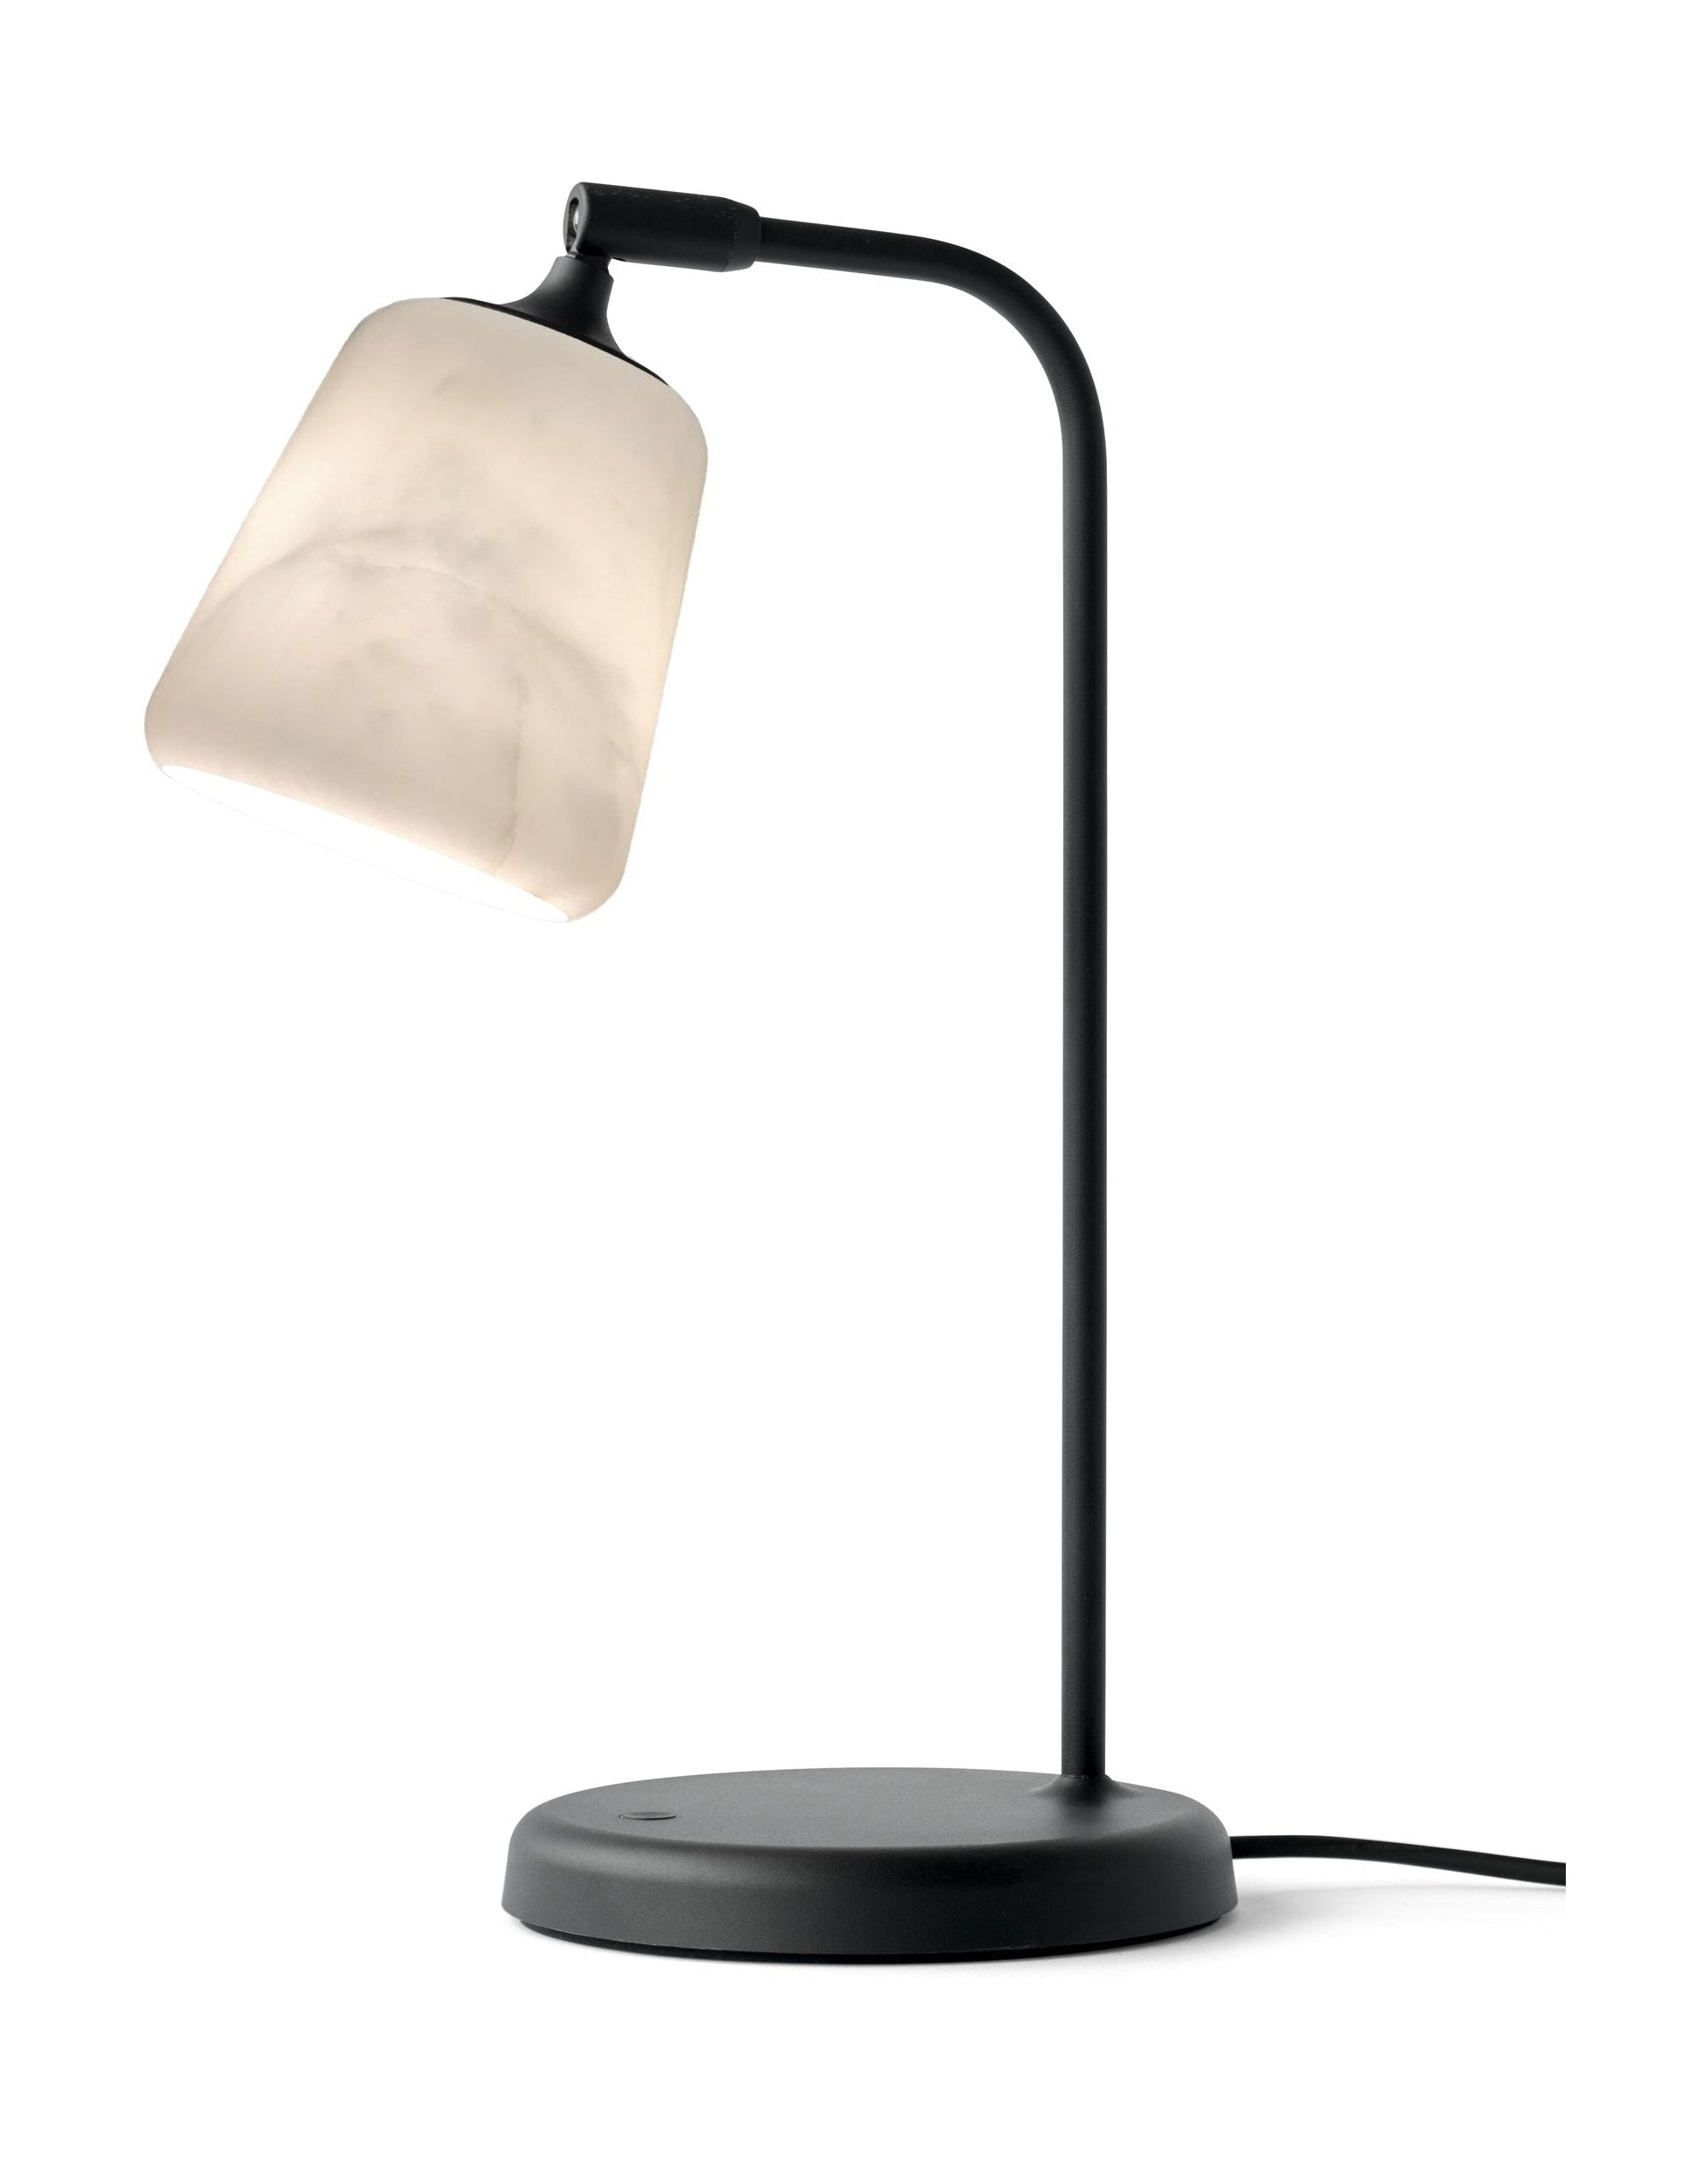 New Works Material Table Lamp, The Black Sheep